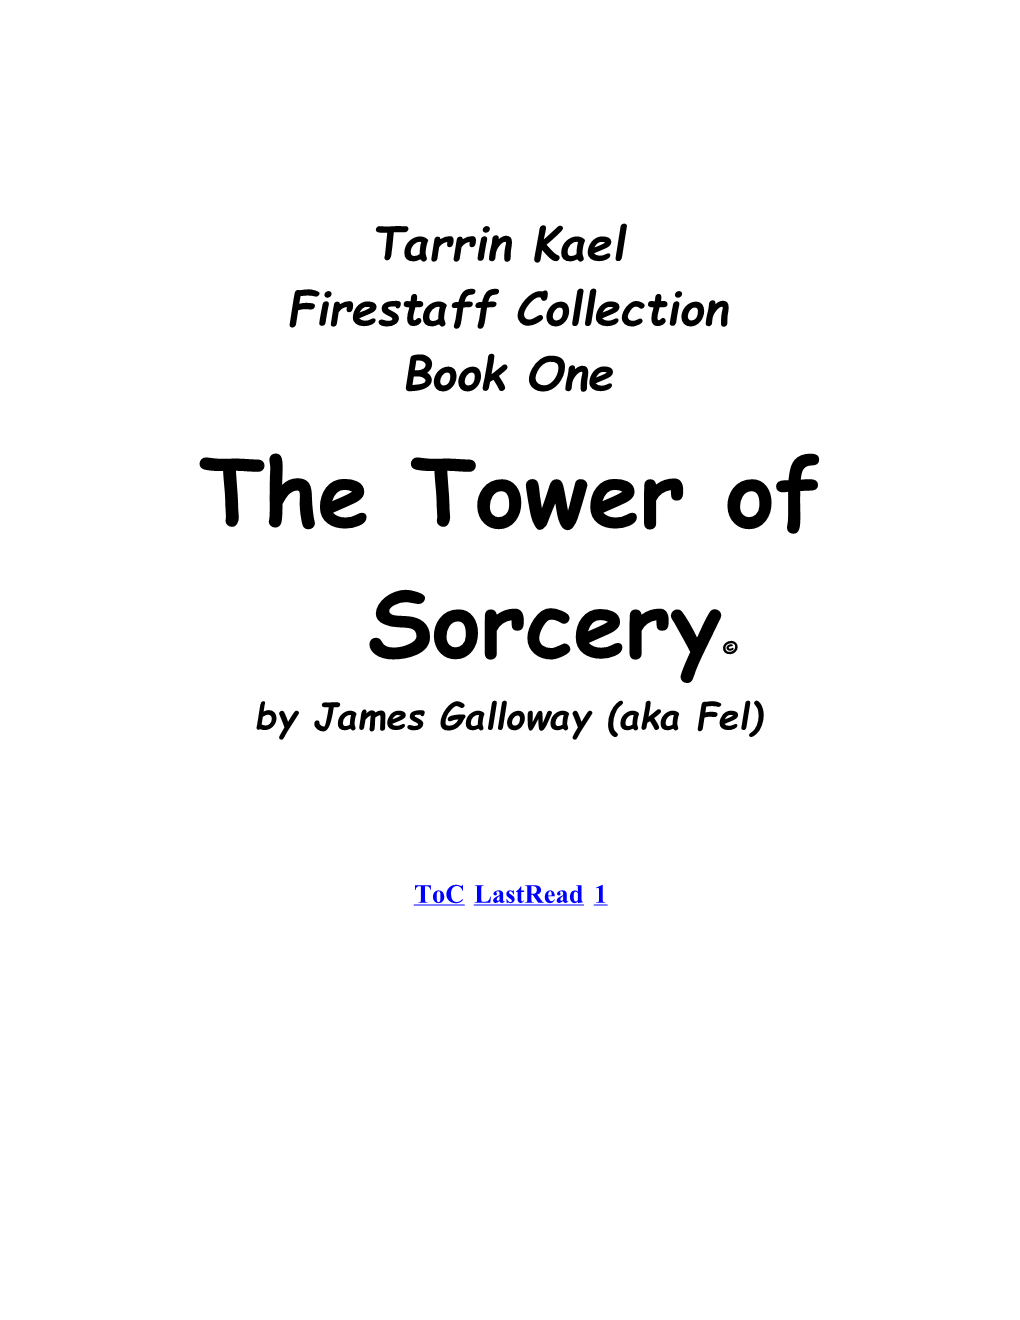 TKFC01 - Tarrin Kael Firestaff Collection Book 1 - Tower of Sorcery by Fel